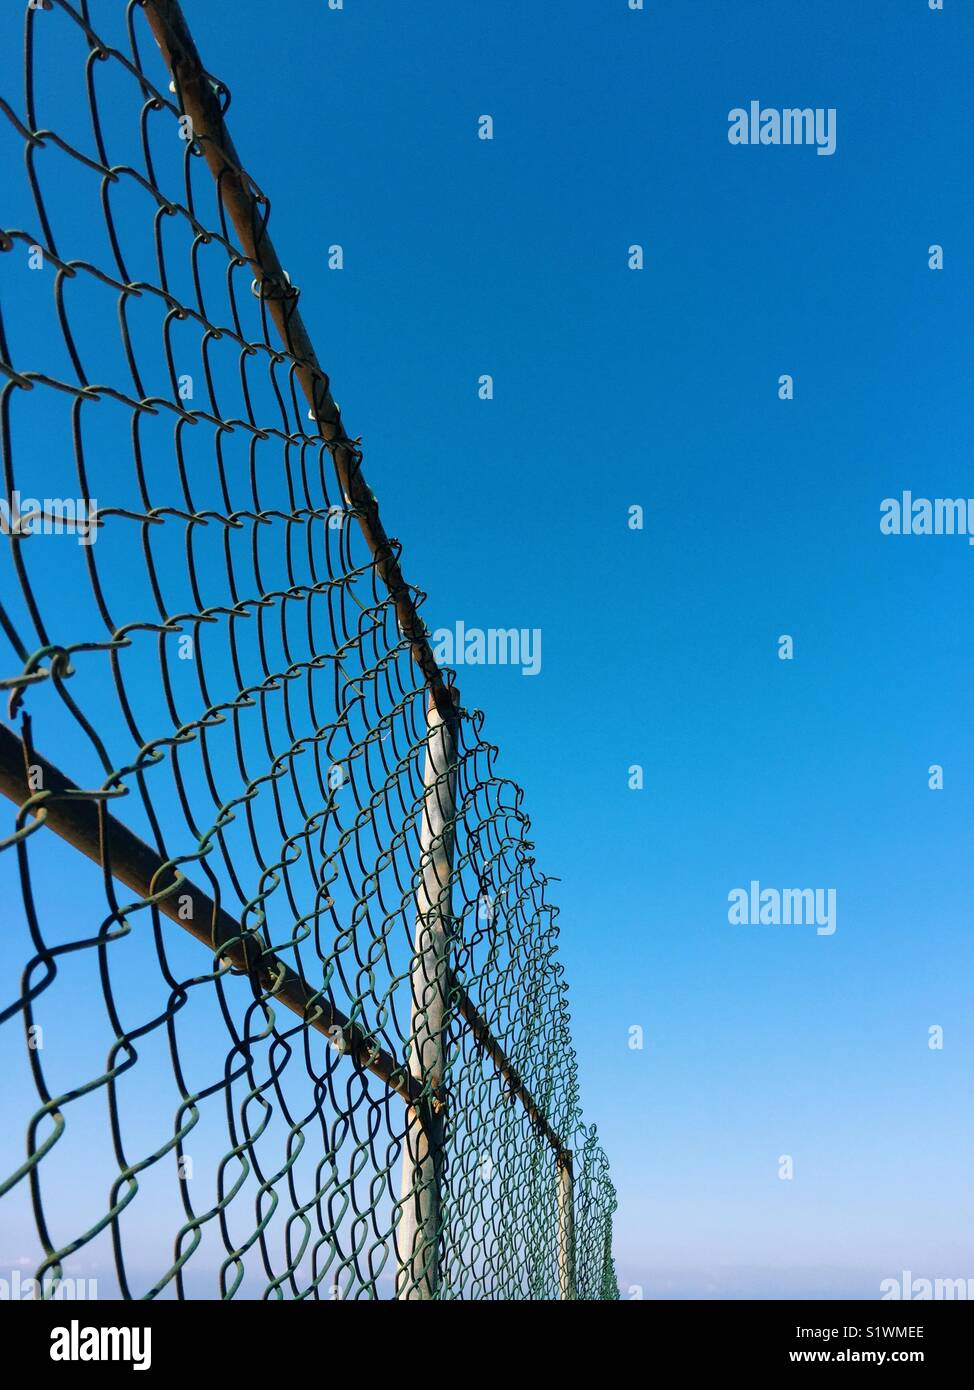 Metal chicken wire fence against blue sky Stock Photo